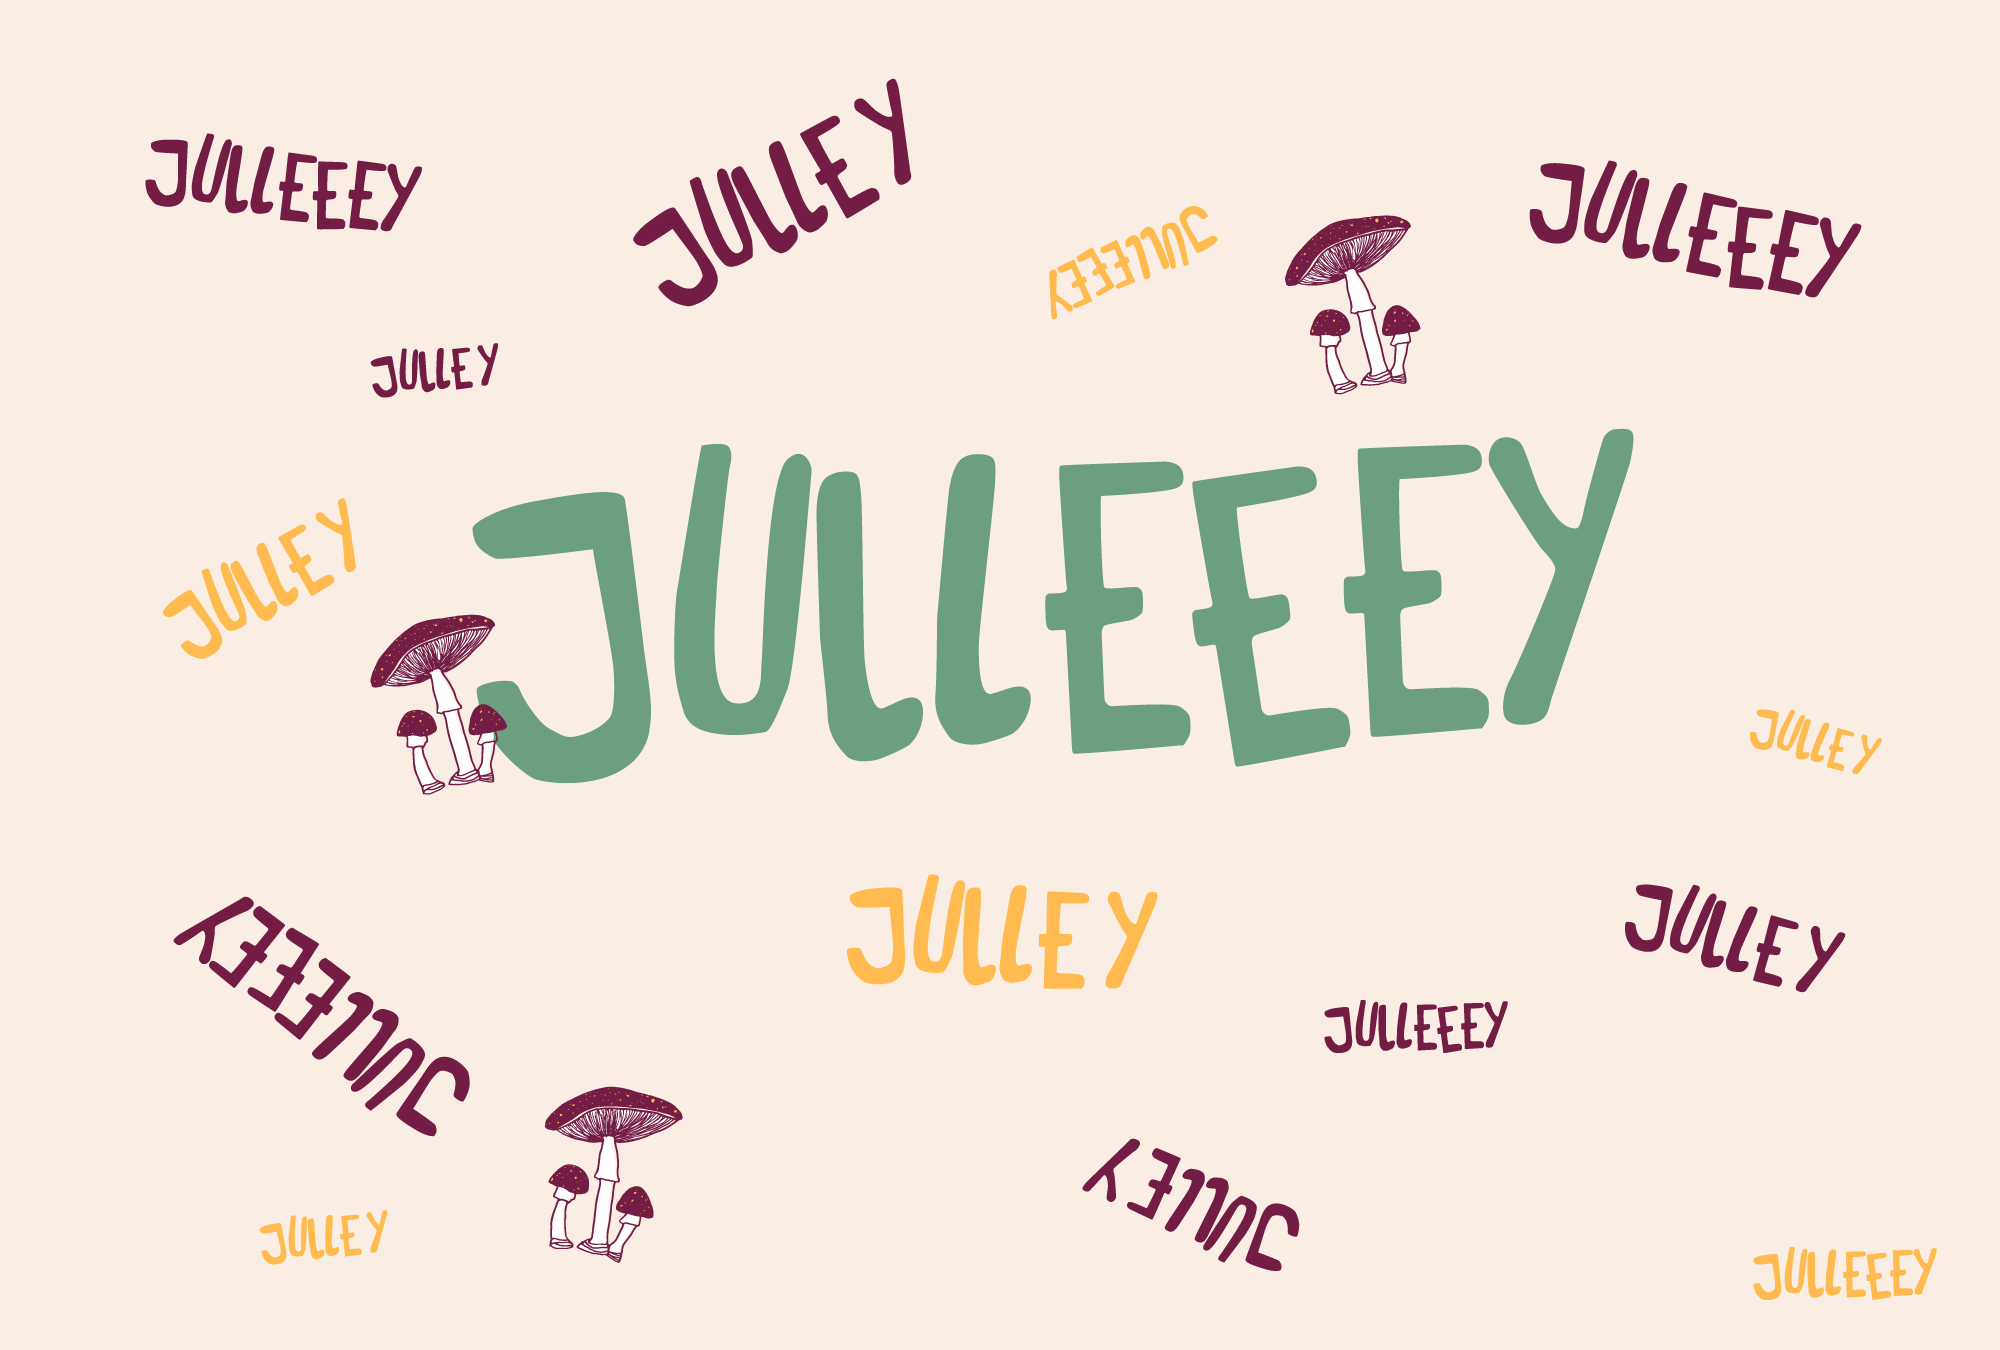 Can Julley Brand Lettering and Illustrations